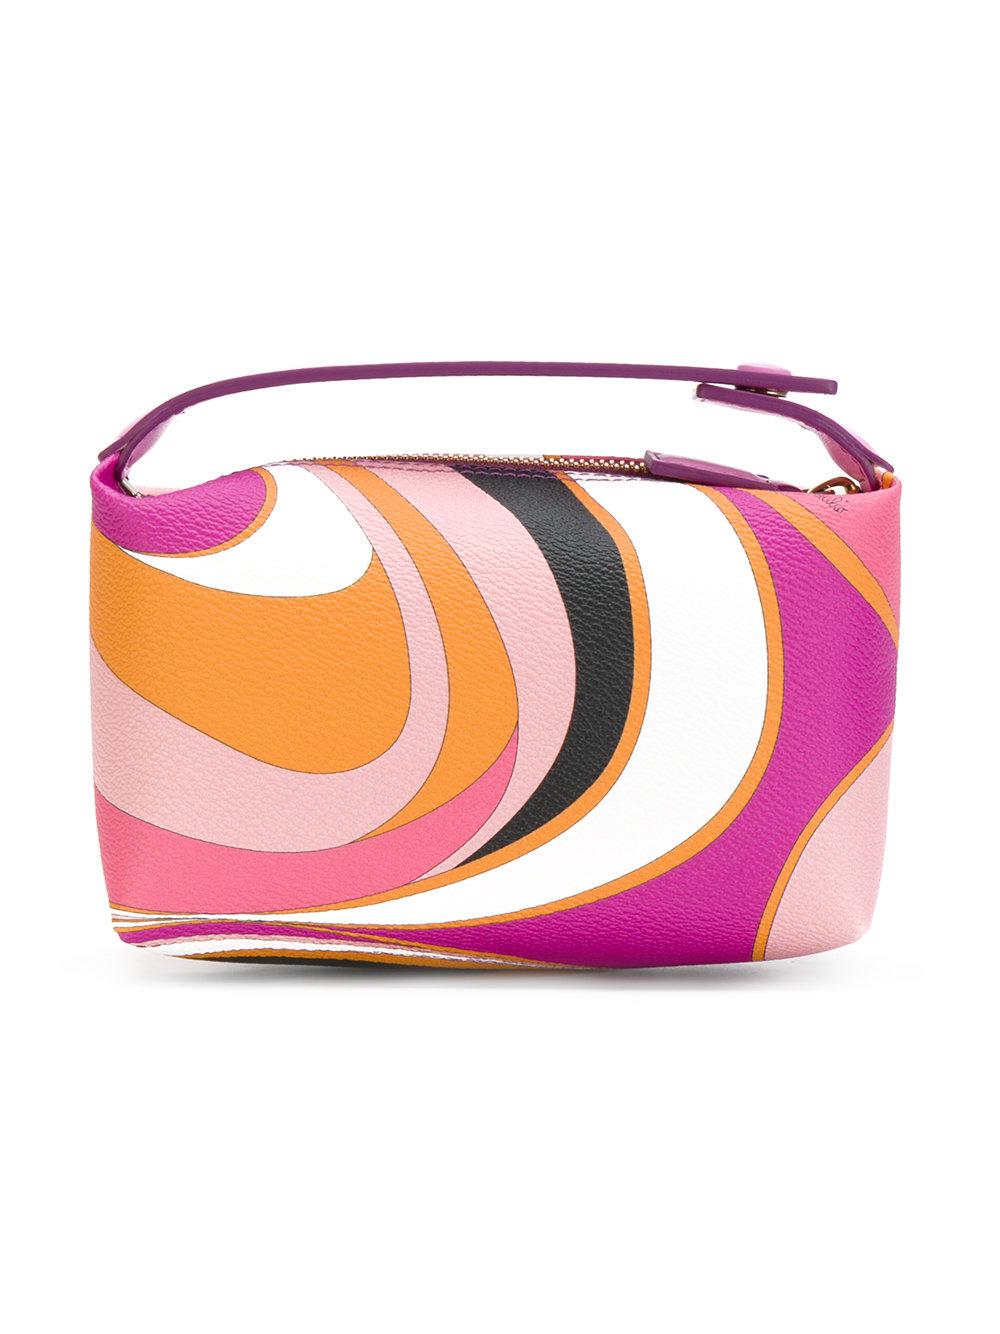 Emilio Pucci Printed Toiletry Bag in Pink & Purple (Pink) | Lyst